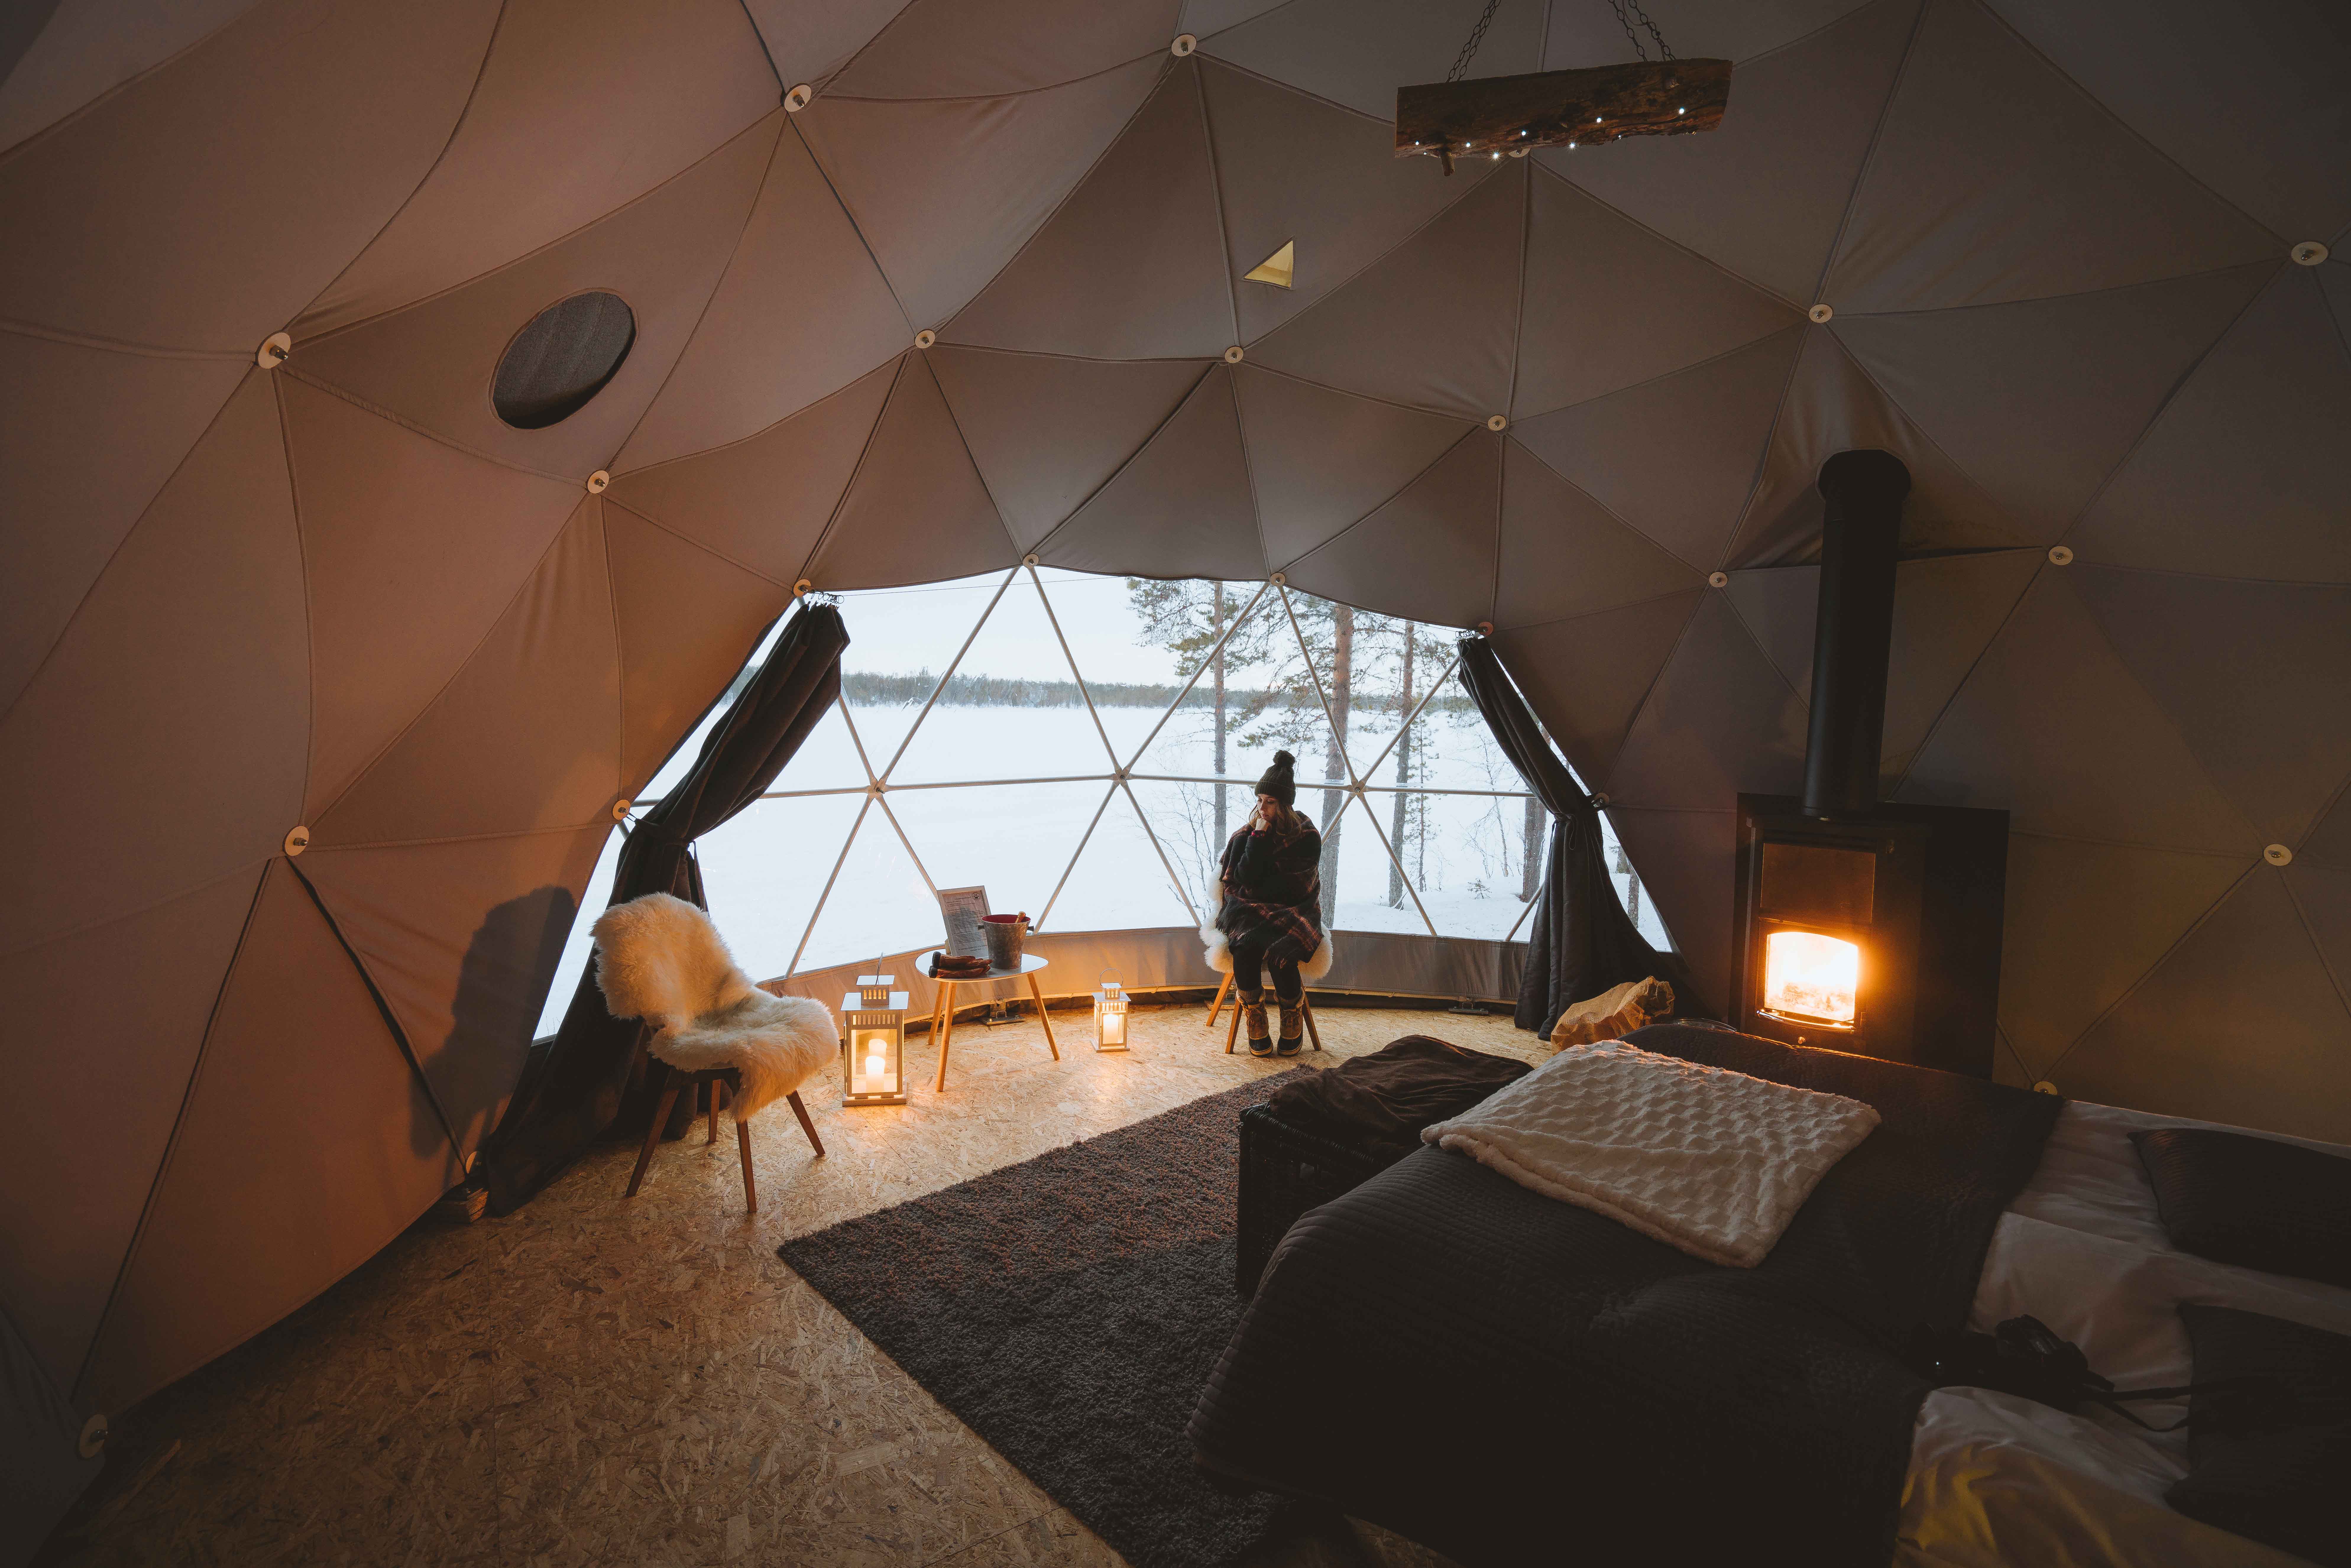 The interior of a round hut-like tent with Lappish-themed decor